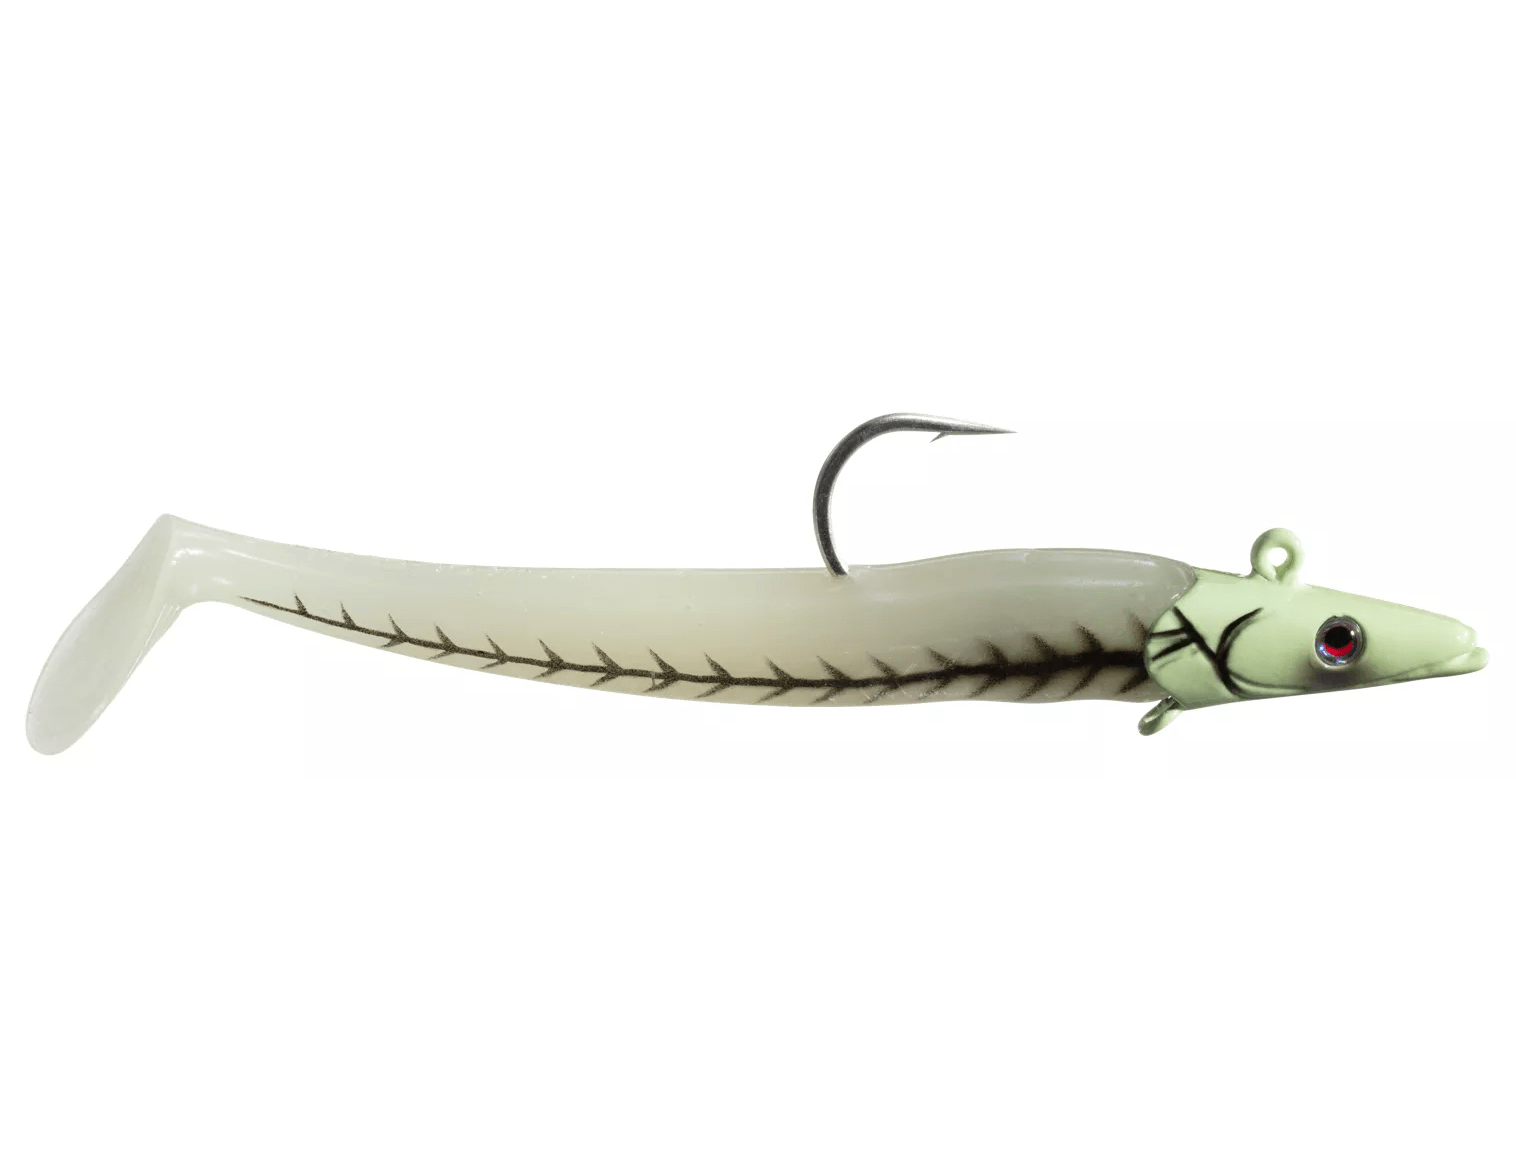  Savage Gear Sandeel Fishing Bait, 1 1/2 oz, Chartreuse White,  Realistic Contours & Movement, Durable Construction, Two Tie Points, 5X  Hooks, Holographic Eyes, Bait Keeper : Sports & Outdoors